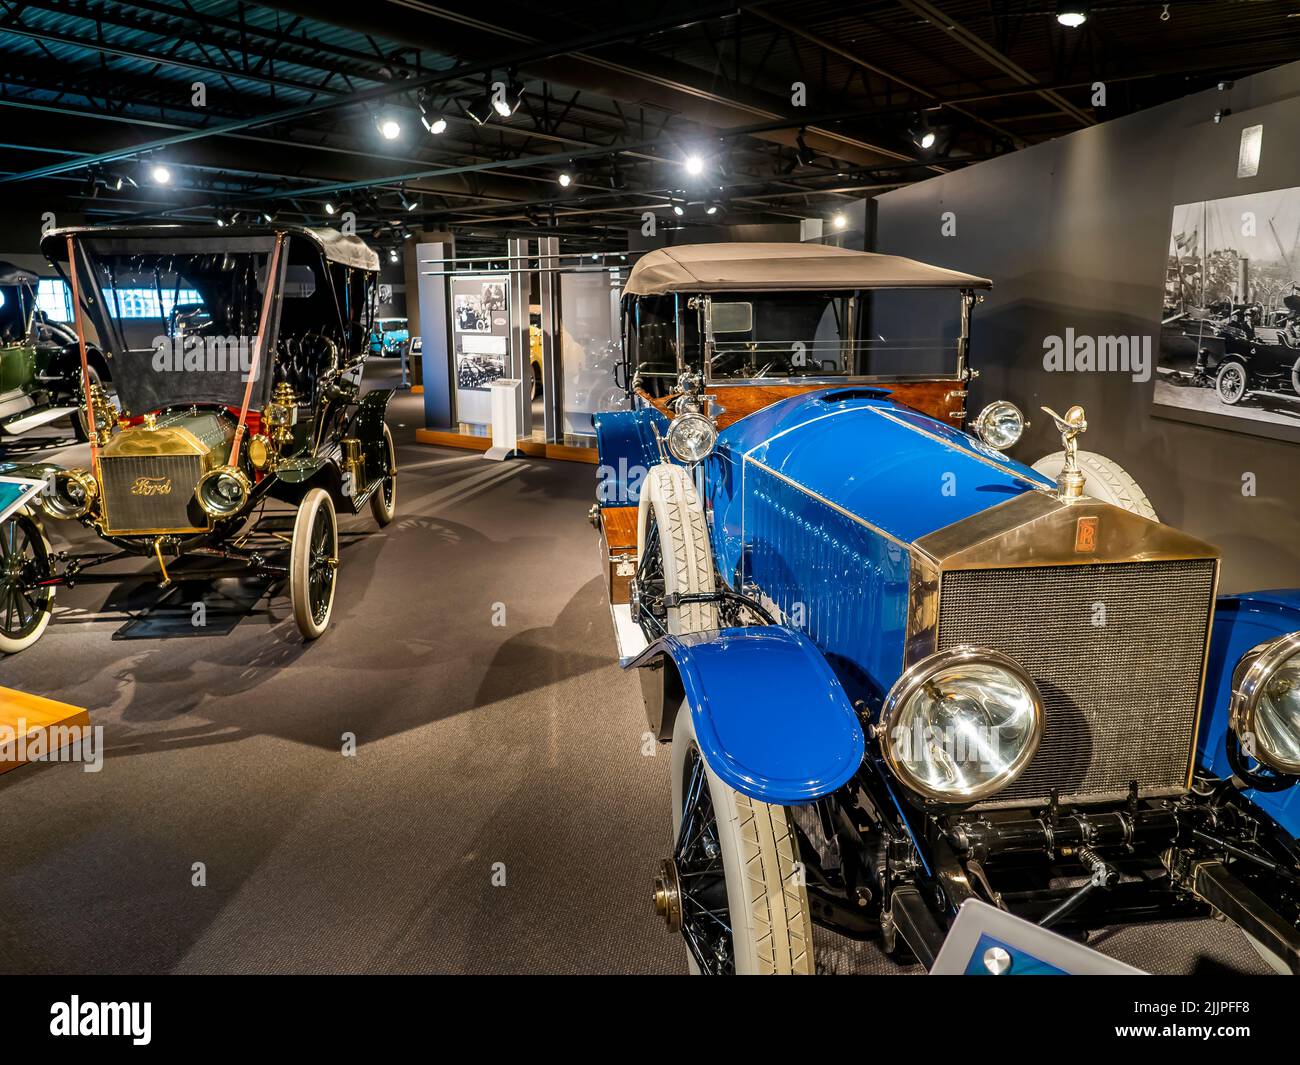 Part of the collection of historic automobiles in the Revs Institute in Naples Florida USA Stock Photo